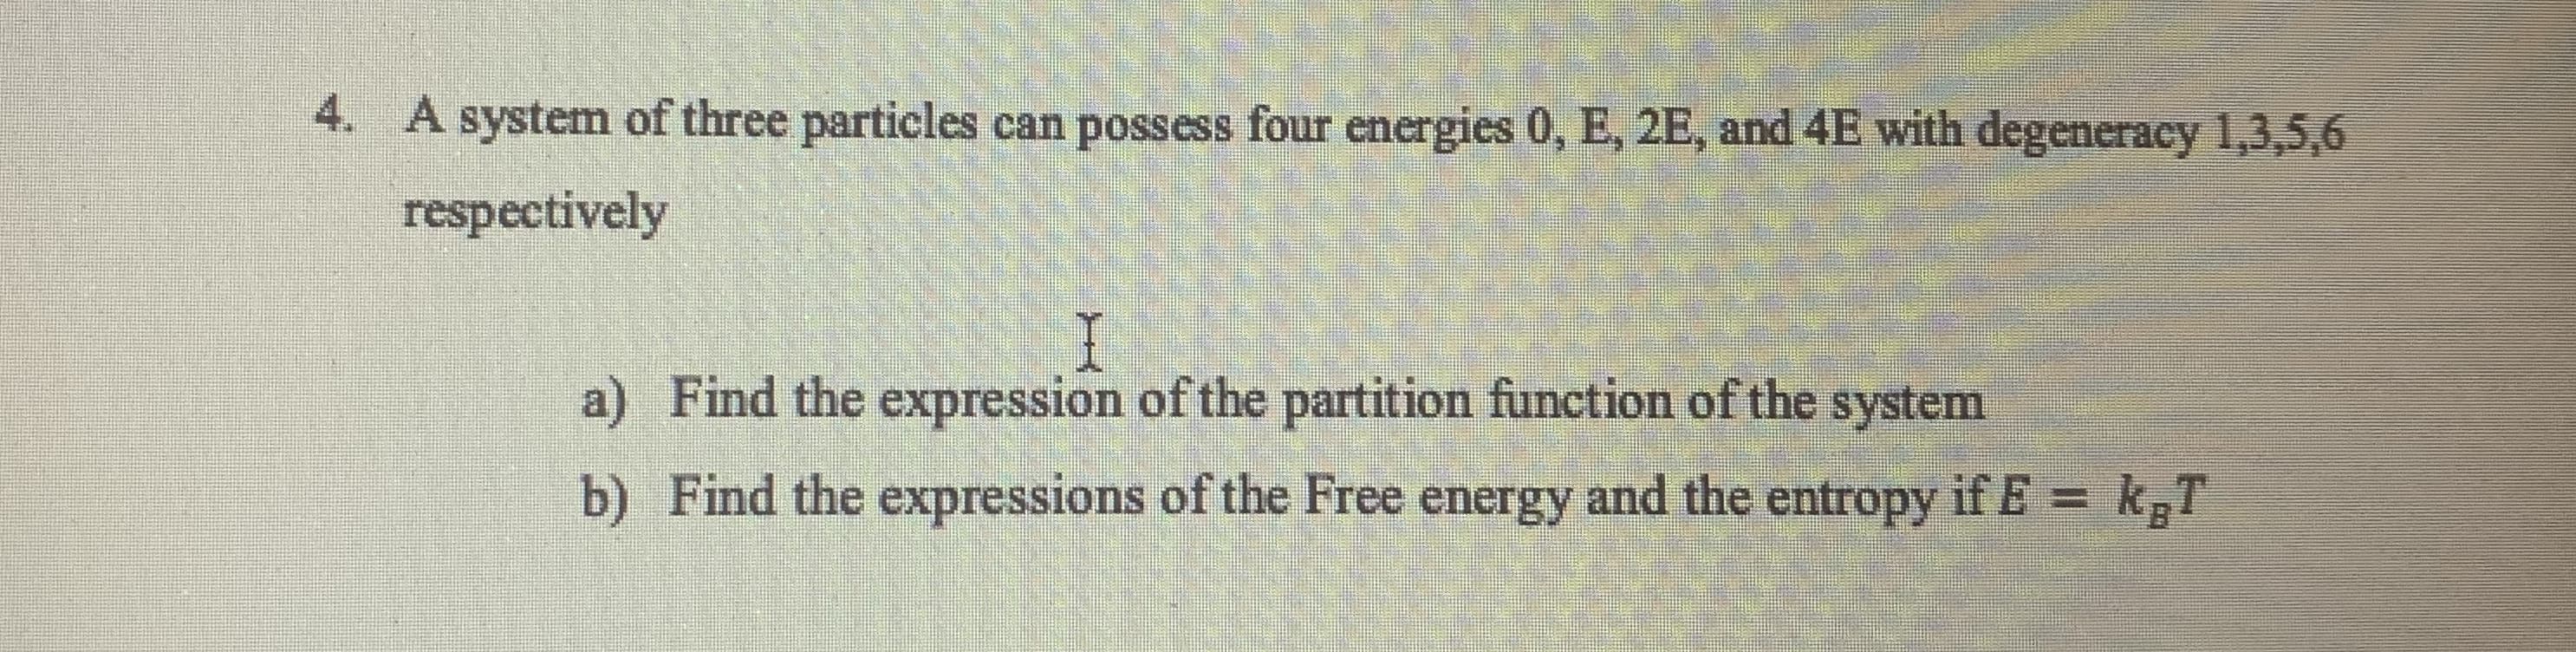 A system of three particles can possess four energies 0, E, 2E, and 4E with degeneracy 1,3,5,6
respectively
a) Find the expression of the partition function of the system
b) Find the expressions of the Free energy and the entropy if E = kgT
